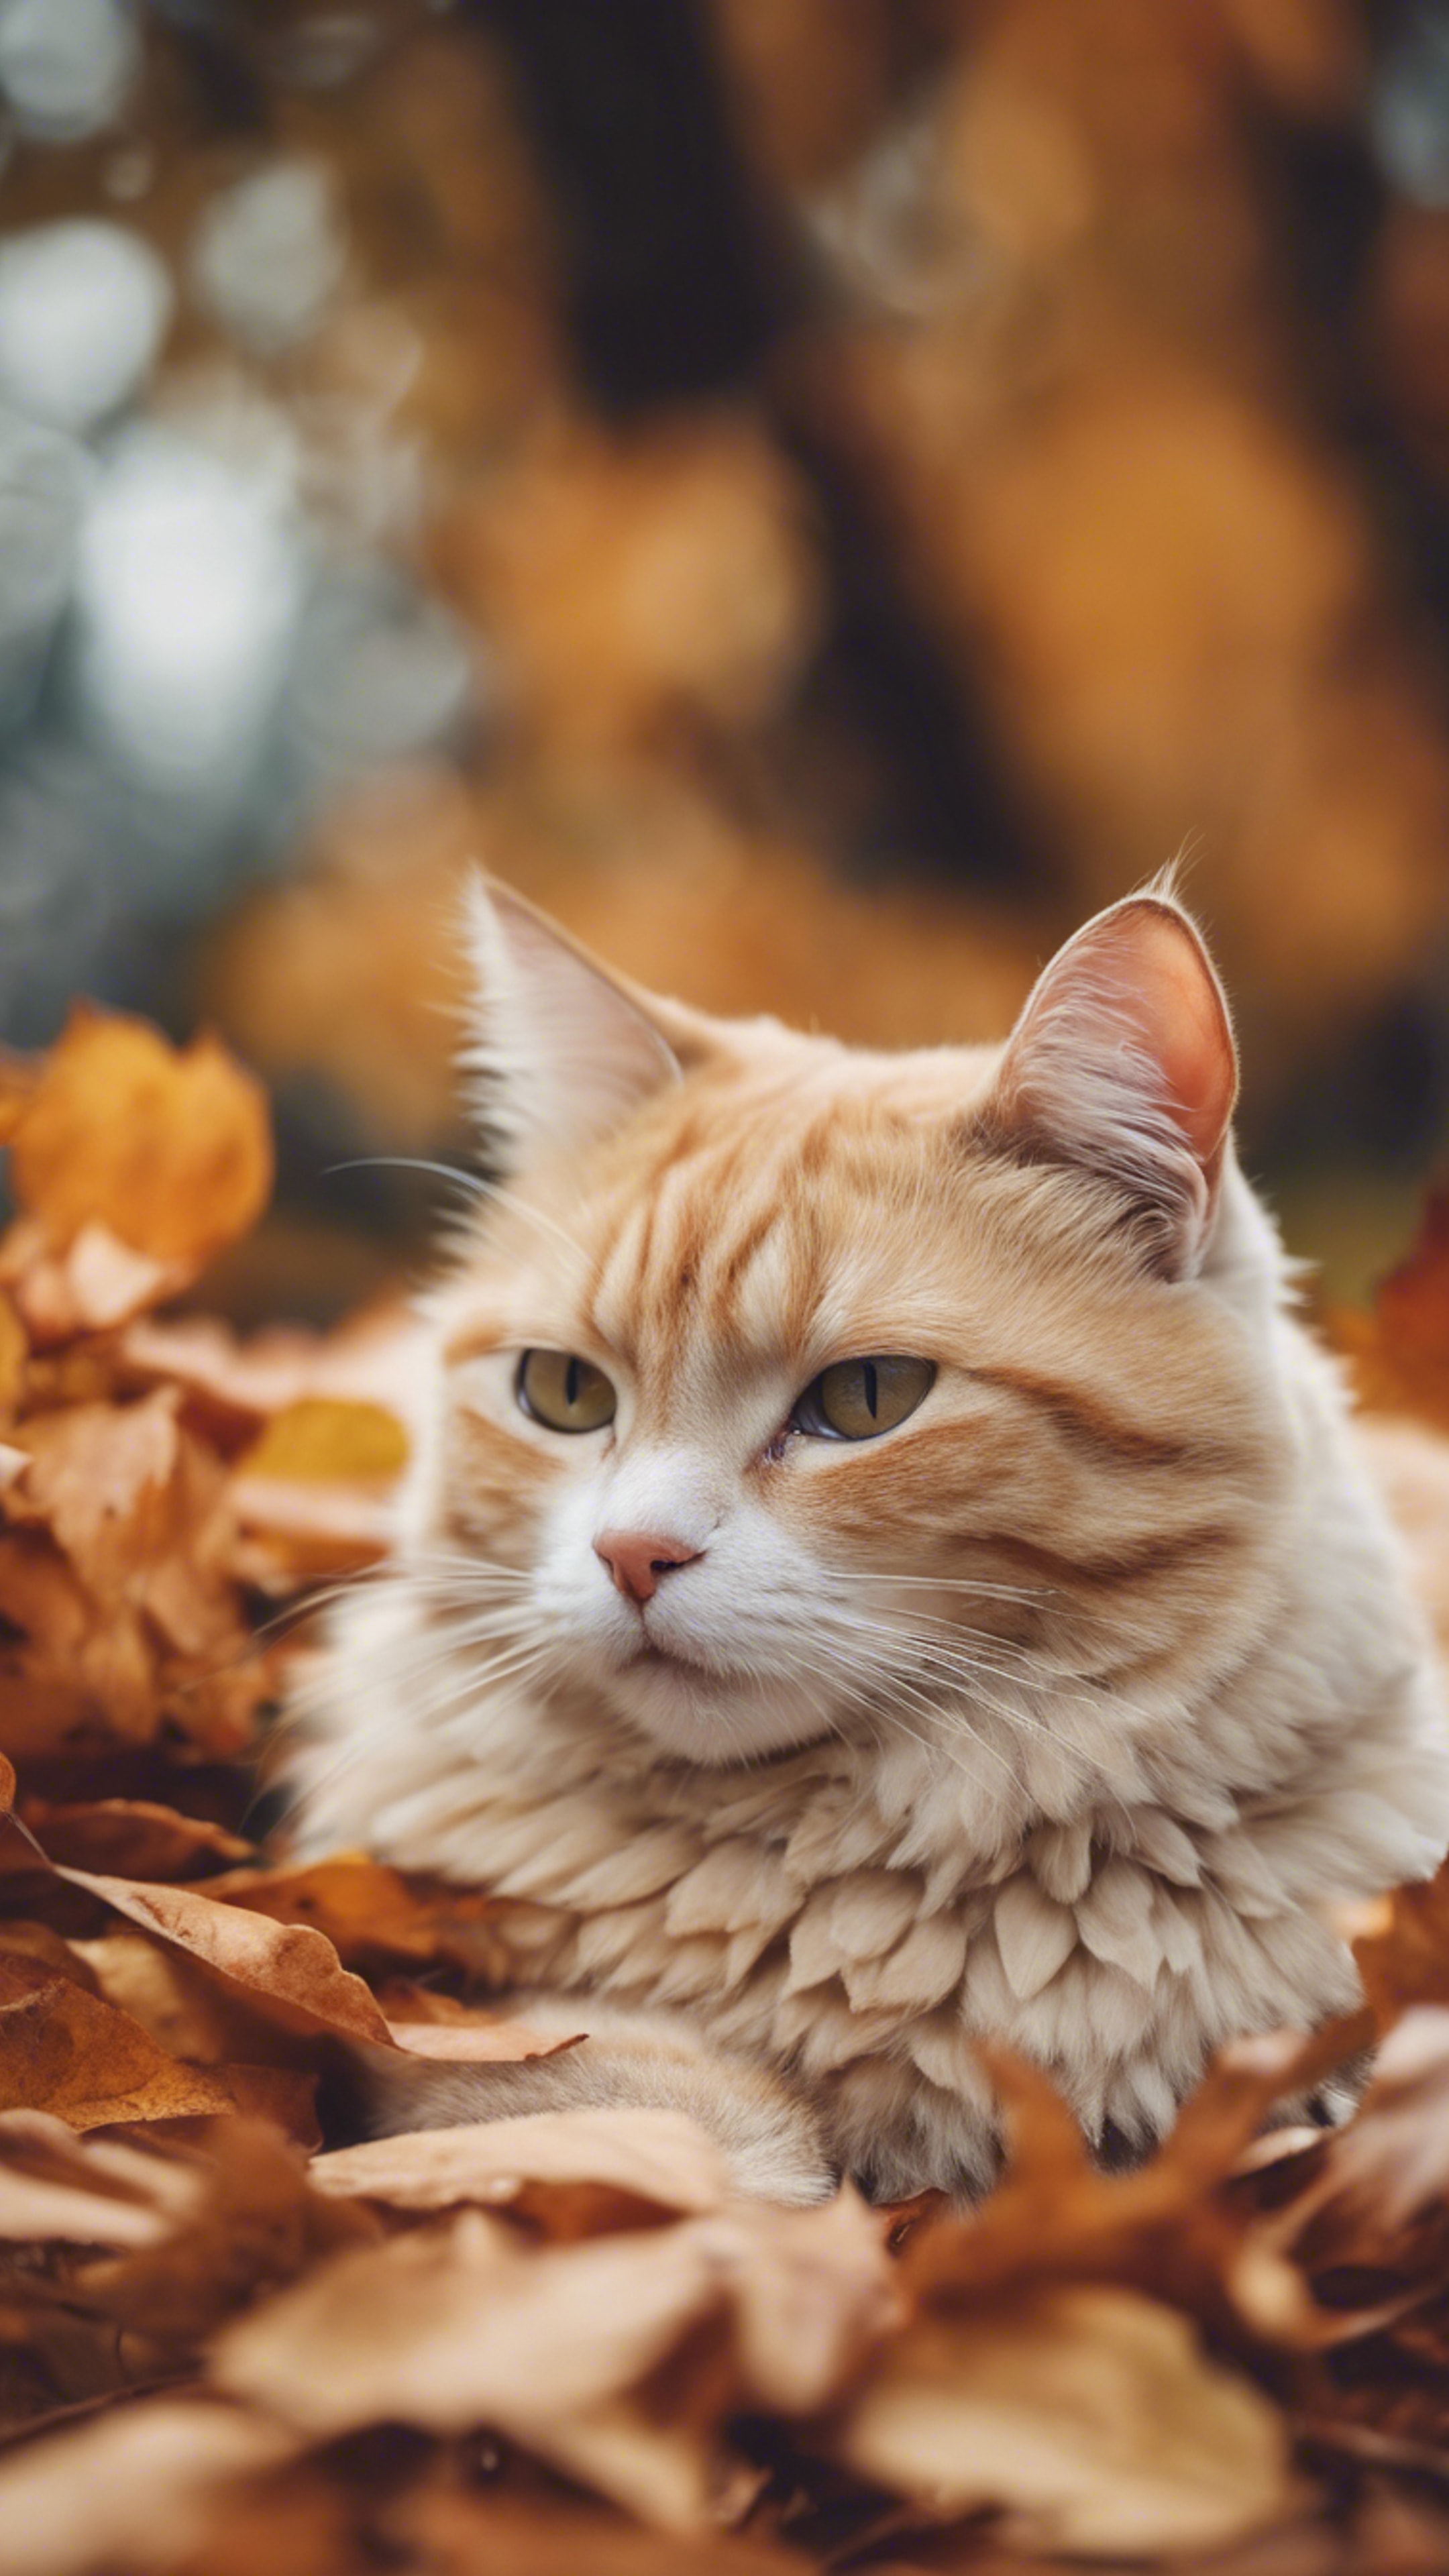 A cute beige cat with a white underbelly is comfortably nestled among a pile of autumn leaves. Wallpaper[0b5114ac3ed6468eb2c7]